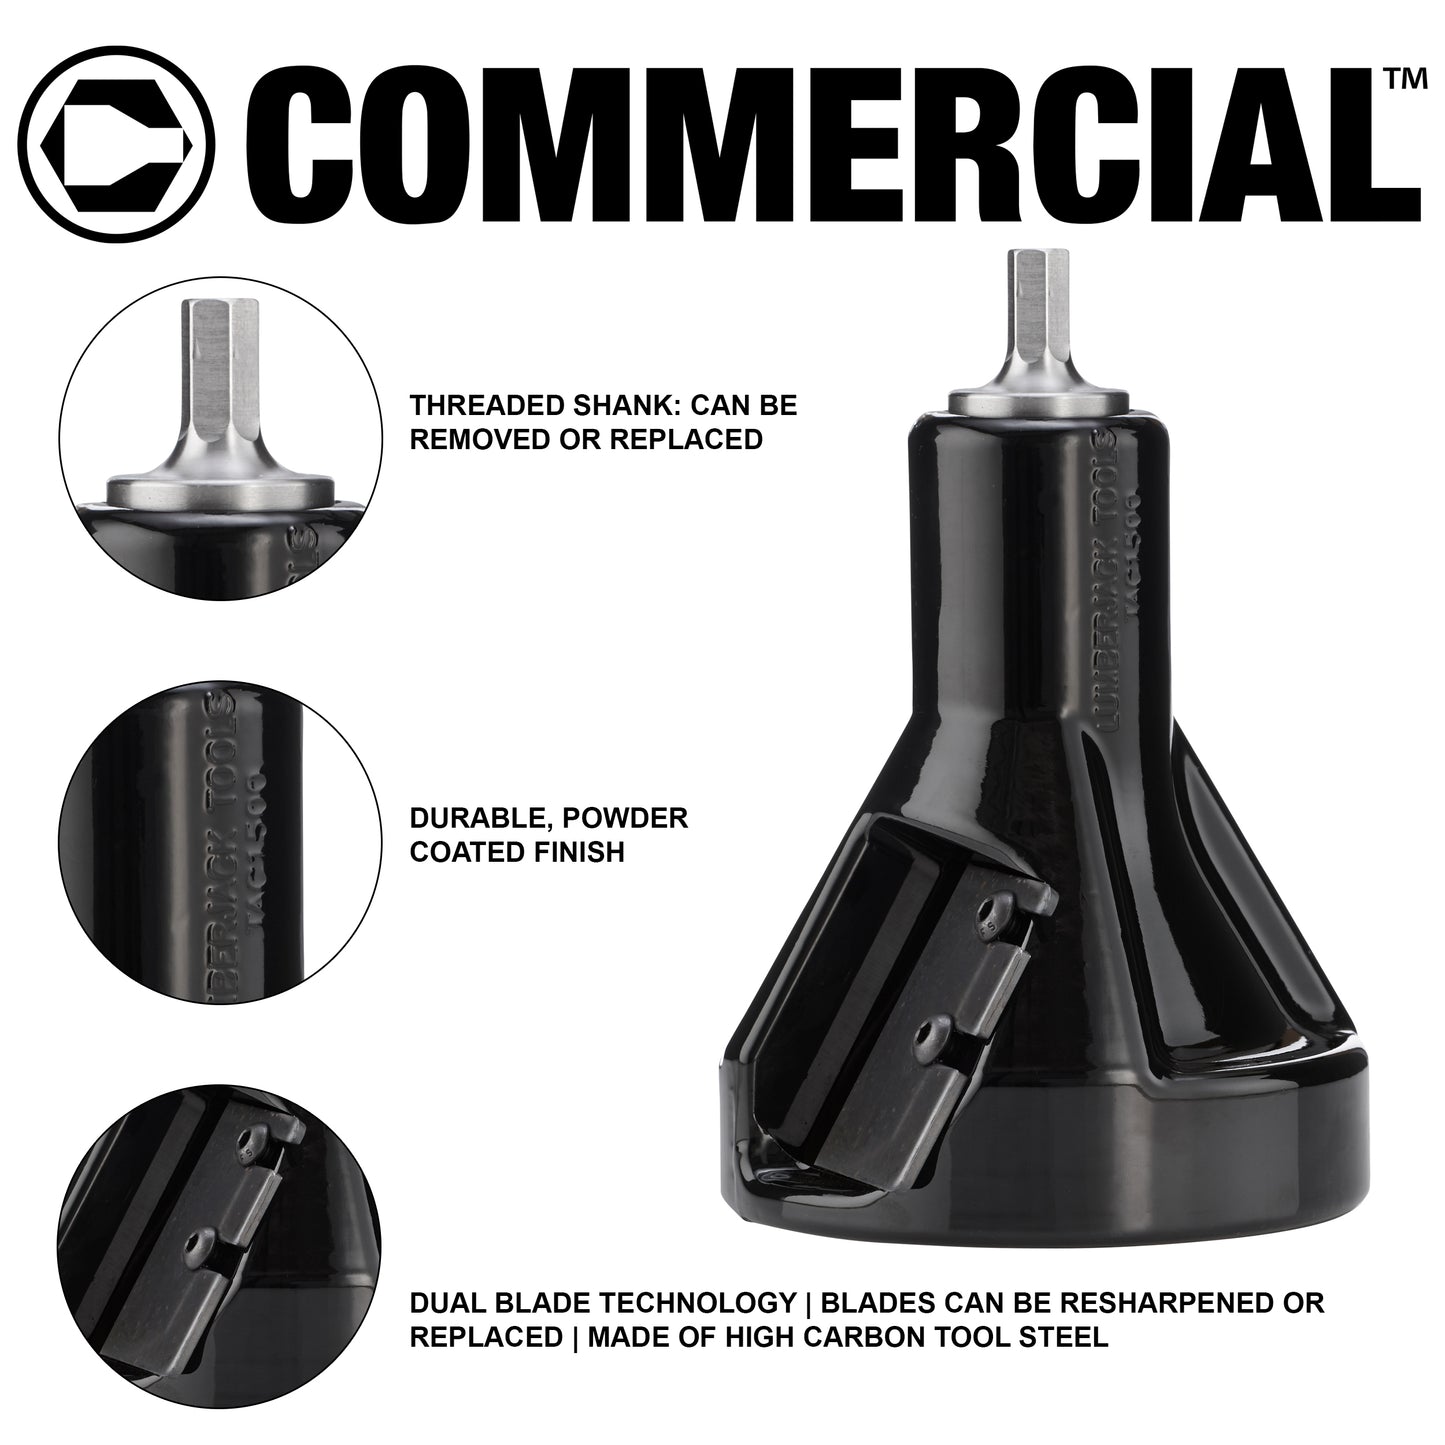 Commercial tenon cutter features that included a silver threaded shank that can be removed, a black, shiny paint color and flat blades attached to the tenon cutter with two button head screws